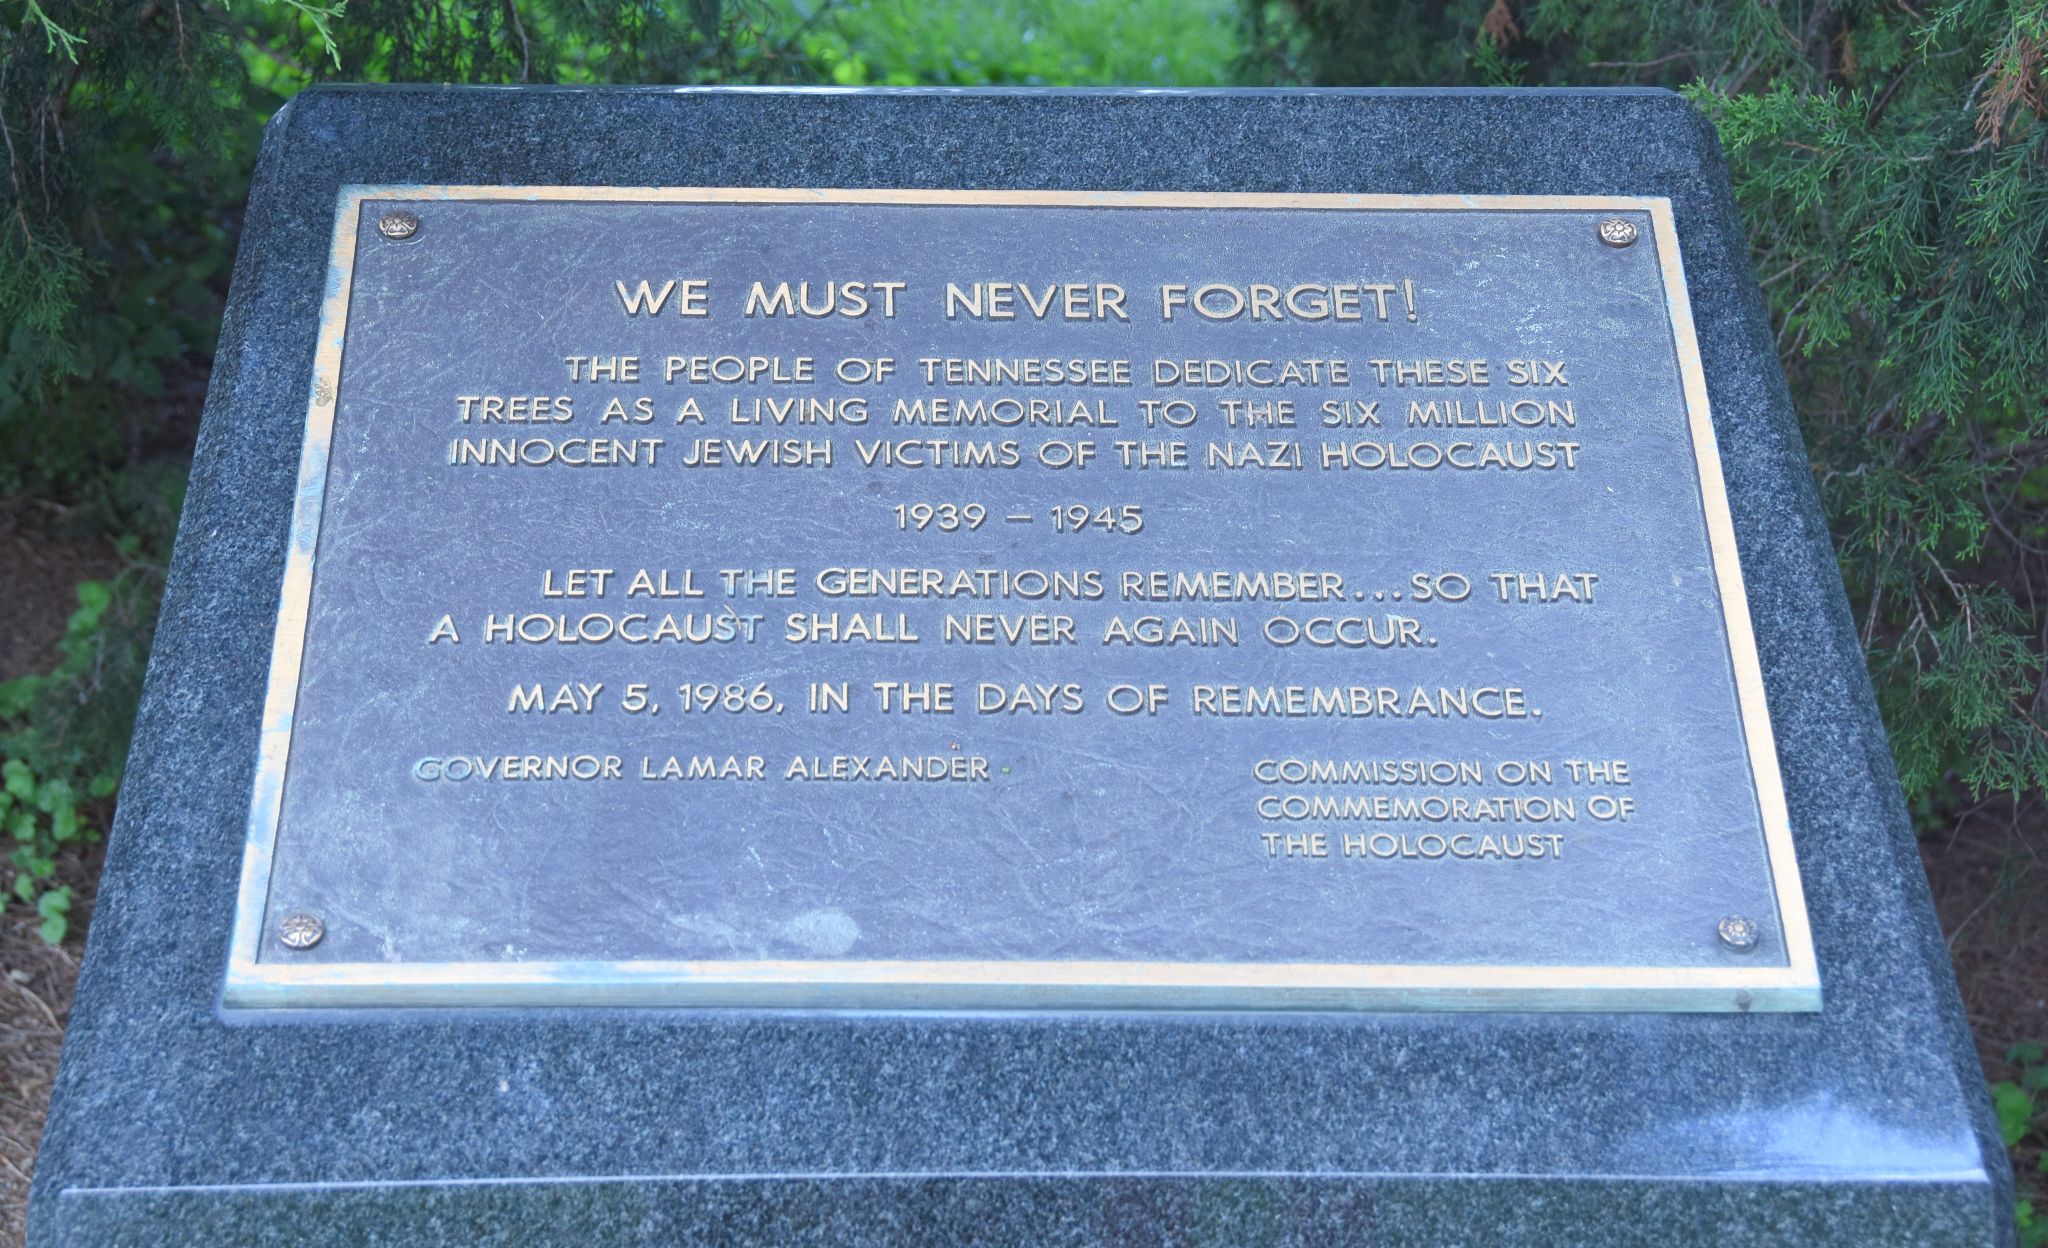 Tennessee-State-Capitol-Grounds-Holocaust-Memorial-Nashville-TN-2016-09-01